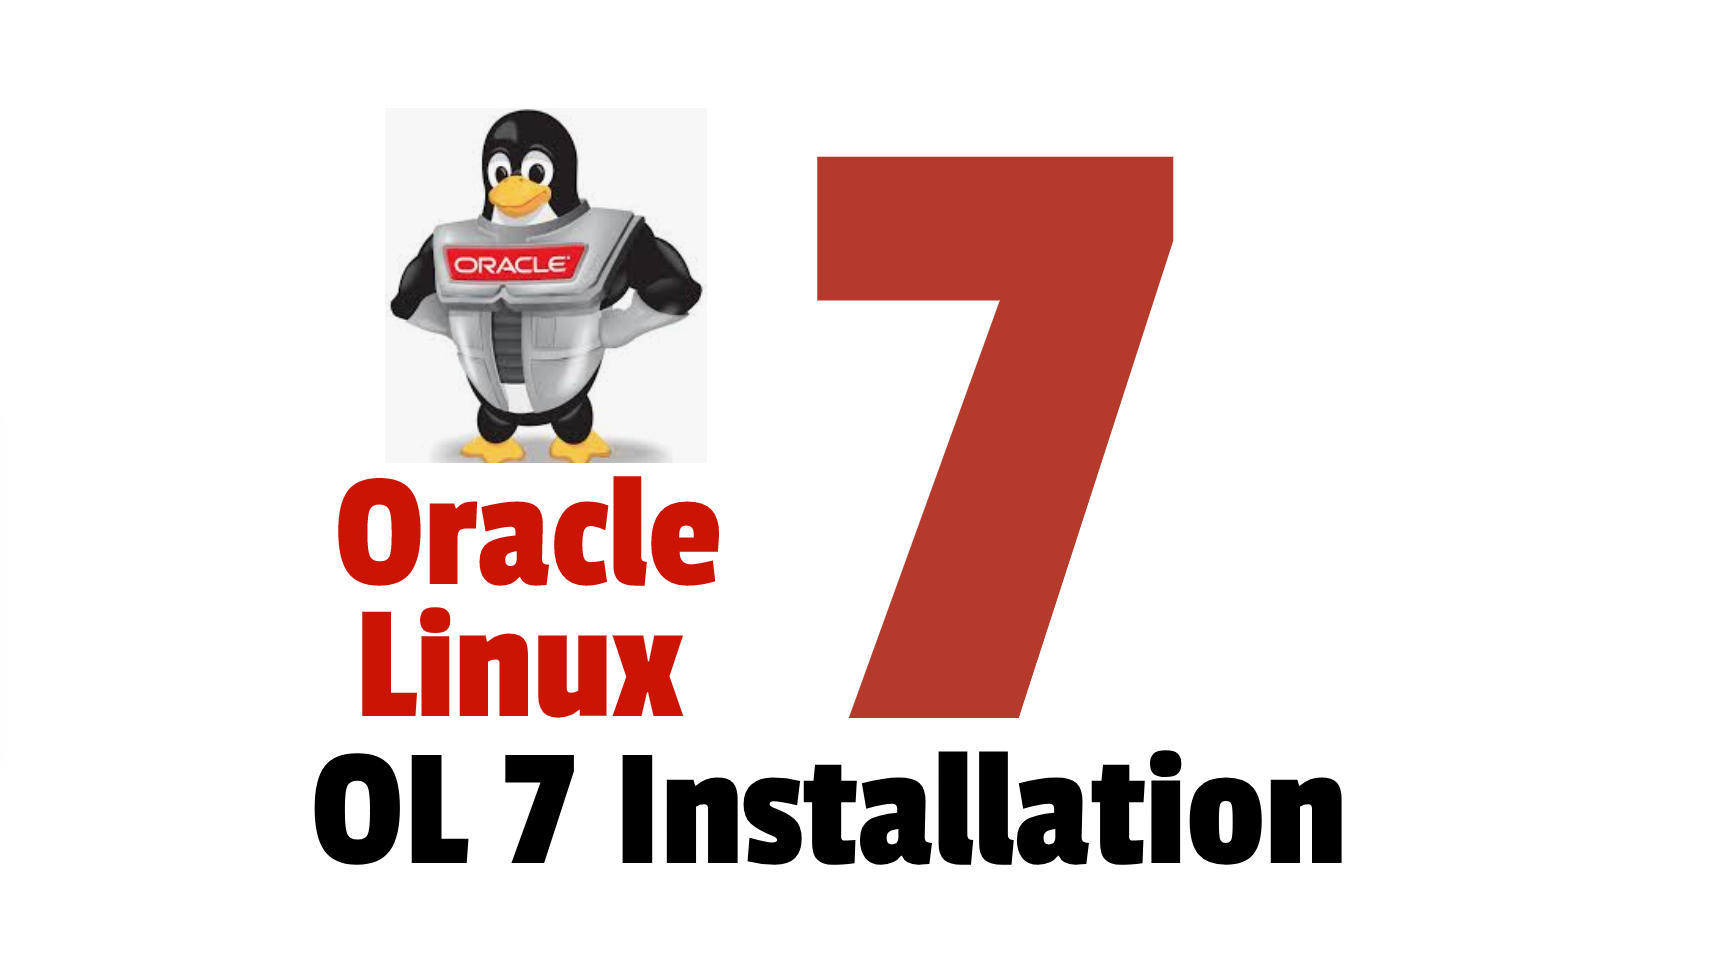 Oracle Linux 7 installation